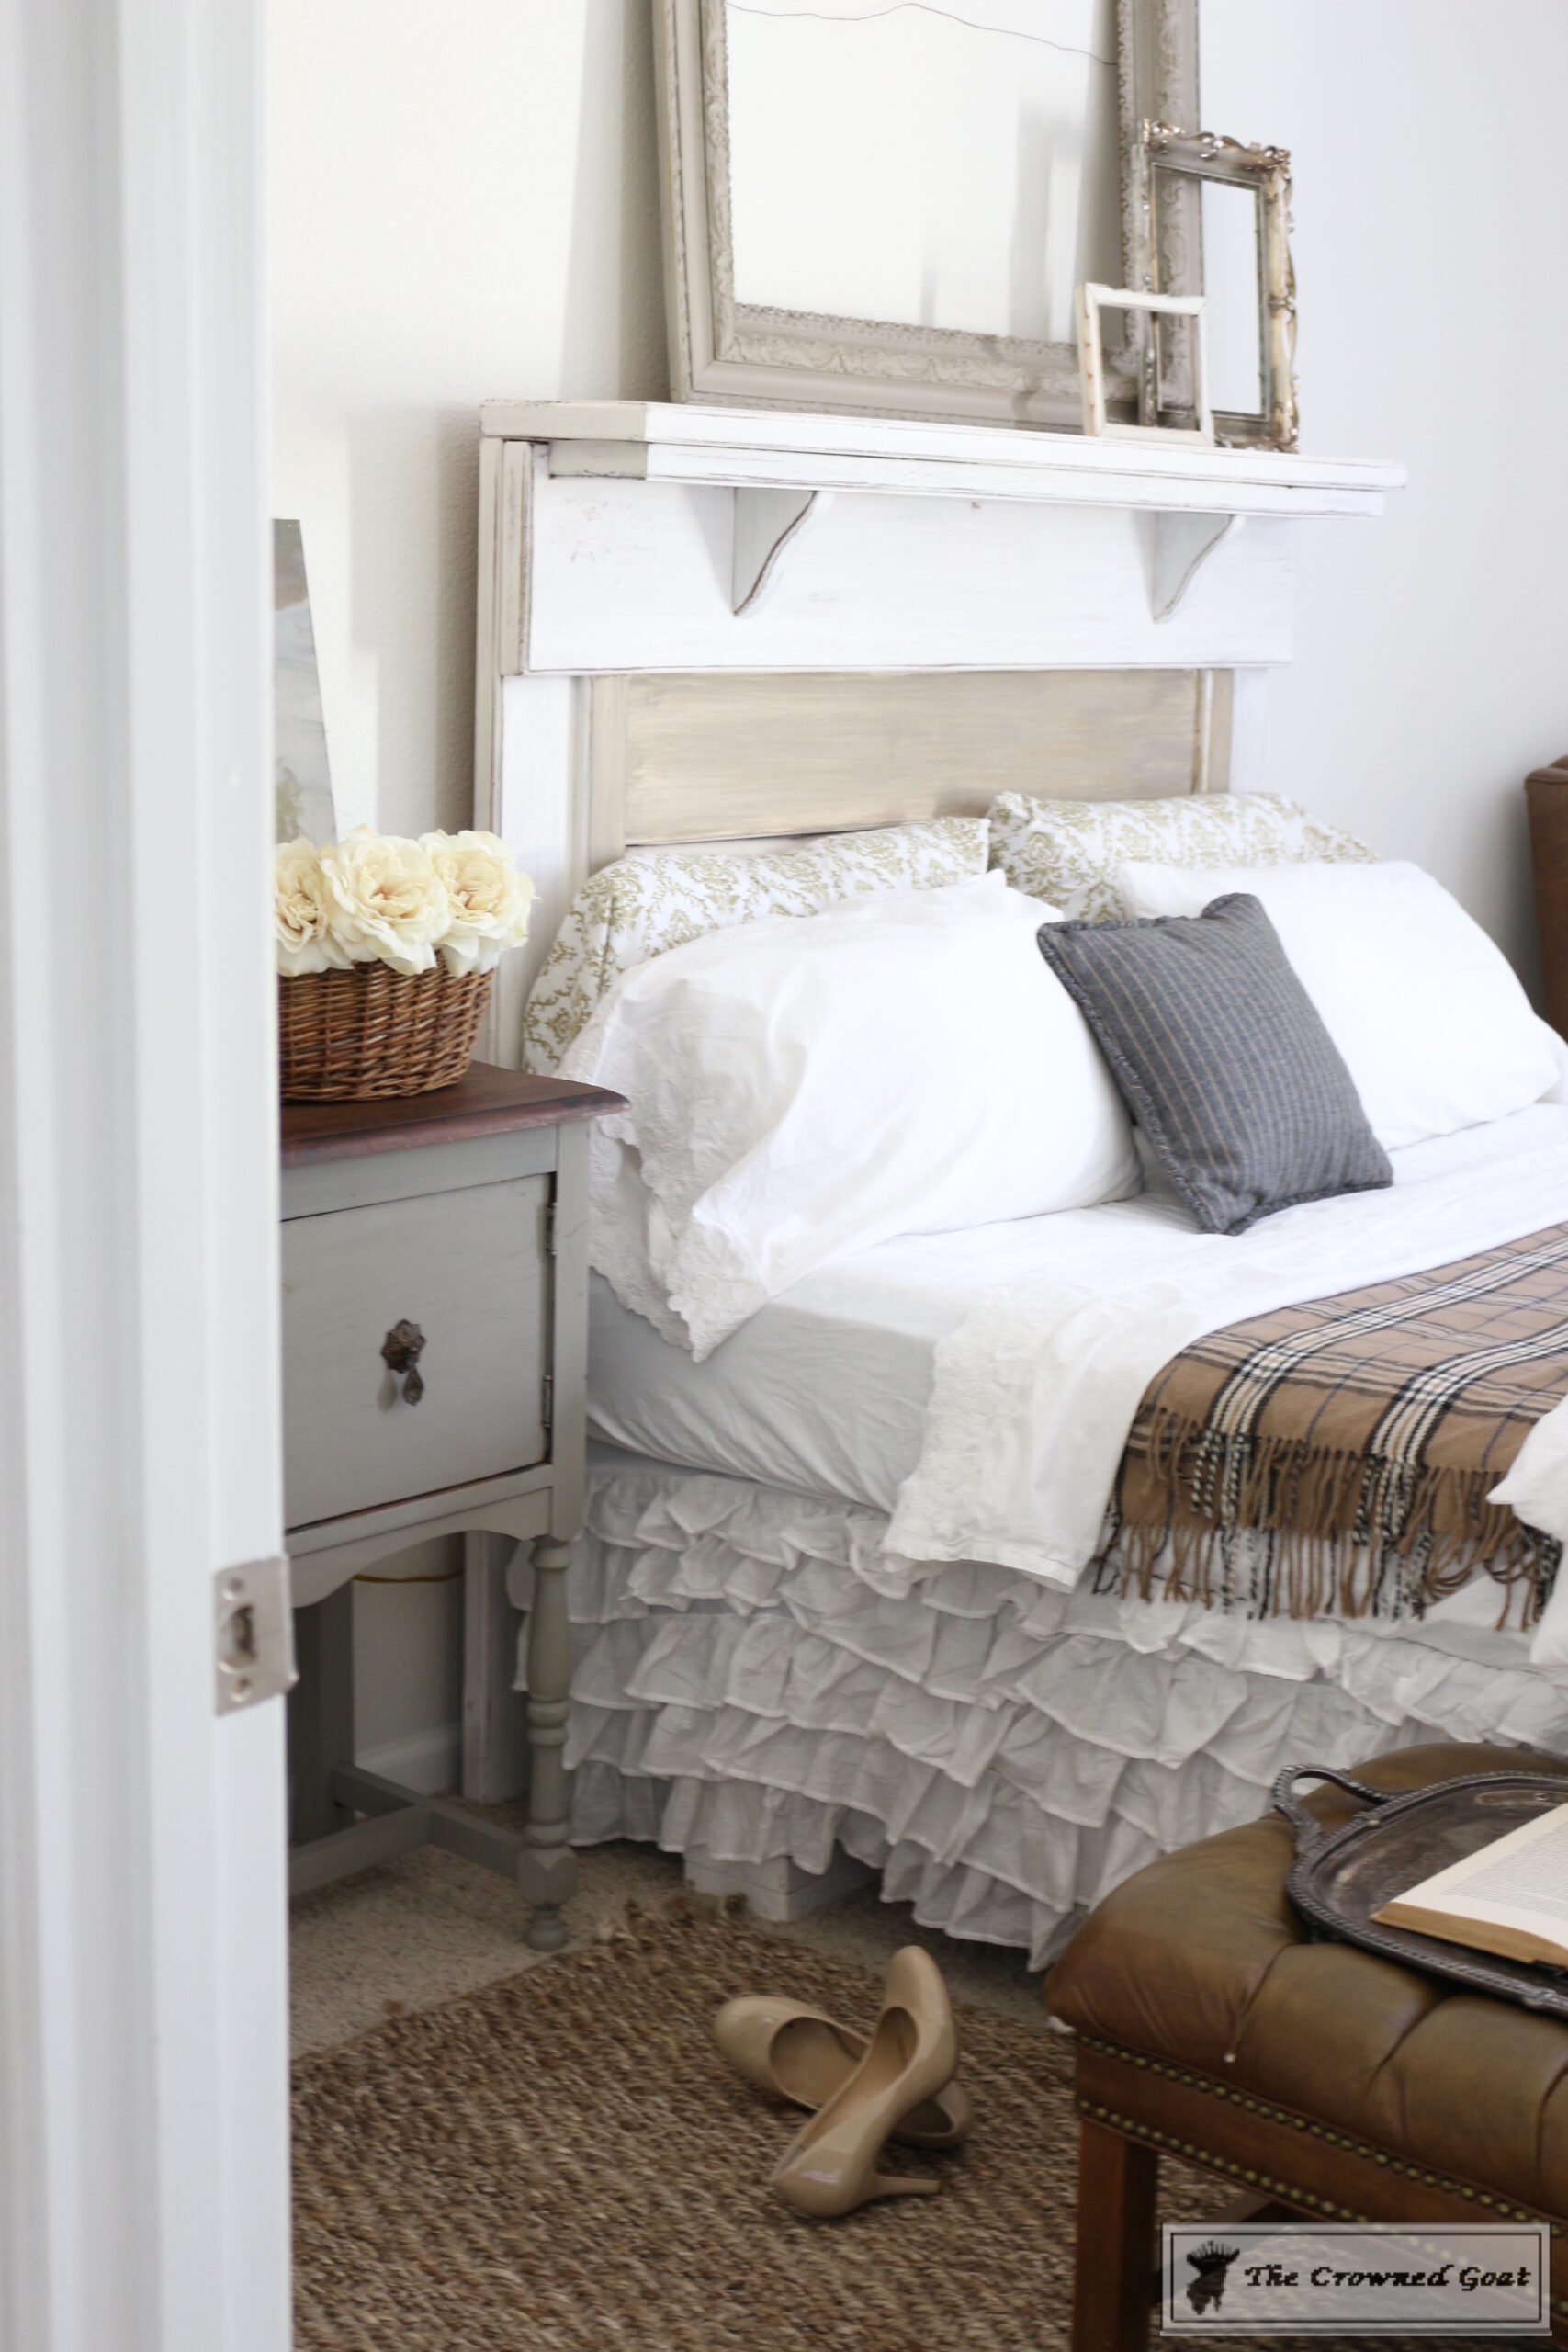 Bedroom Decorating: Small Changes that Make a Big Impact